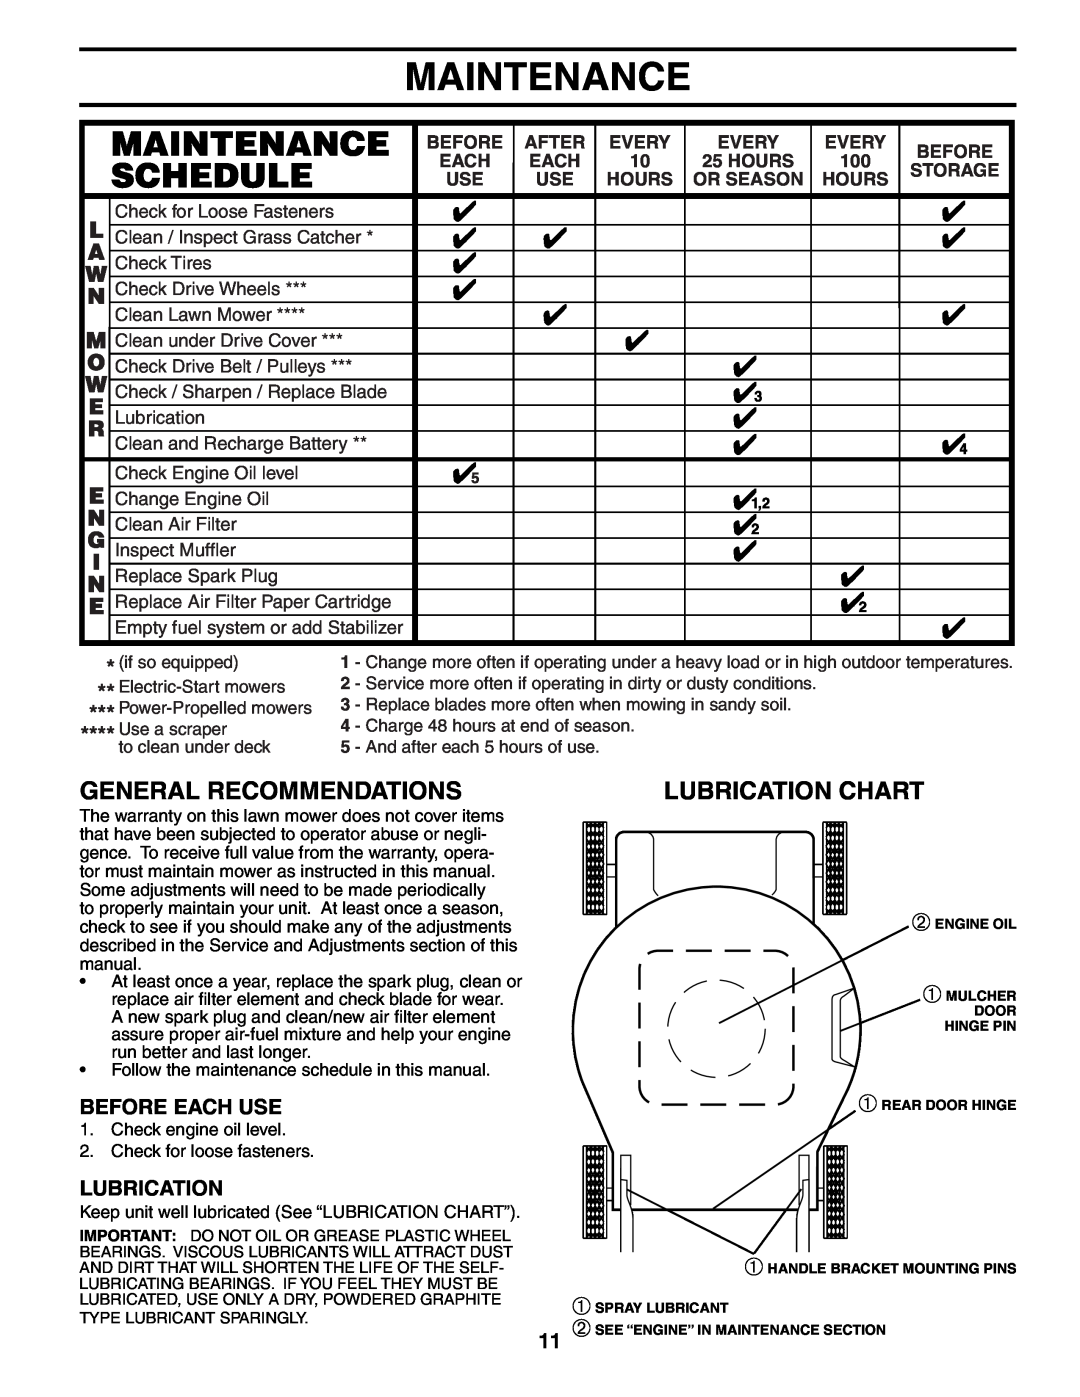 Husqvarna 917.37595 Maintenance, General Recommendations, Lubrication Chart, Before Each Use, After, Every, Hours, Storage 